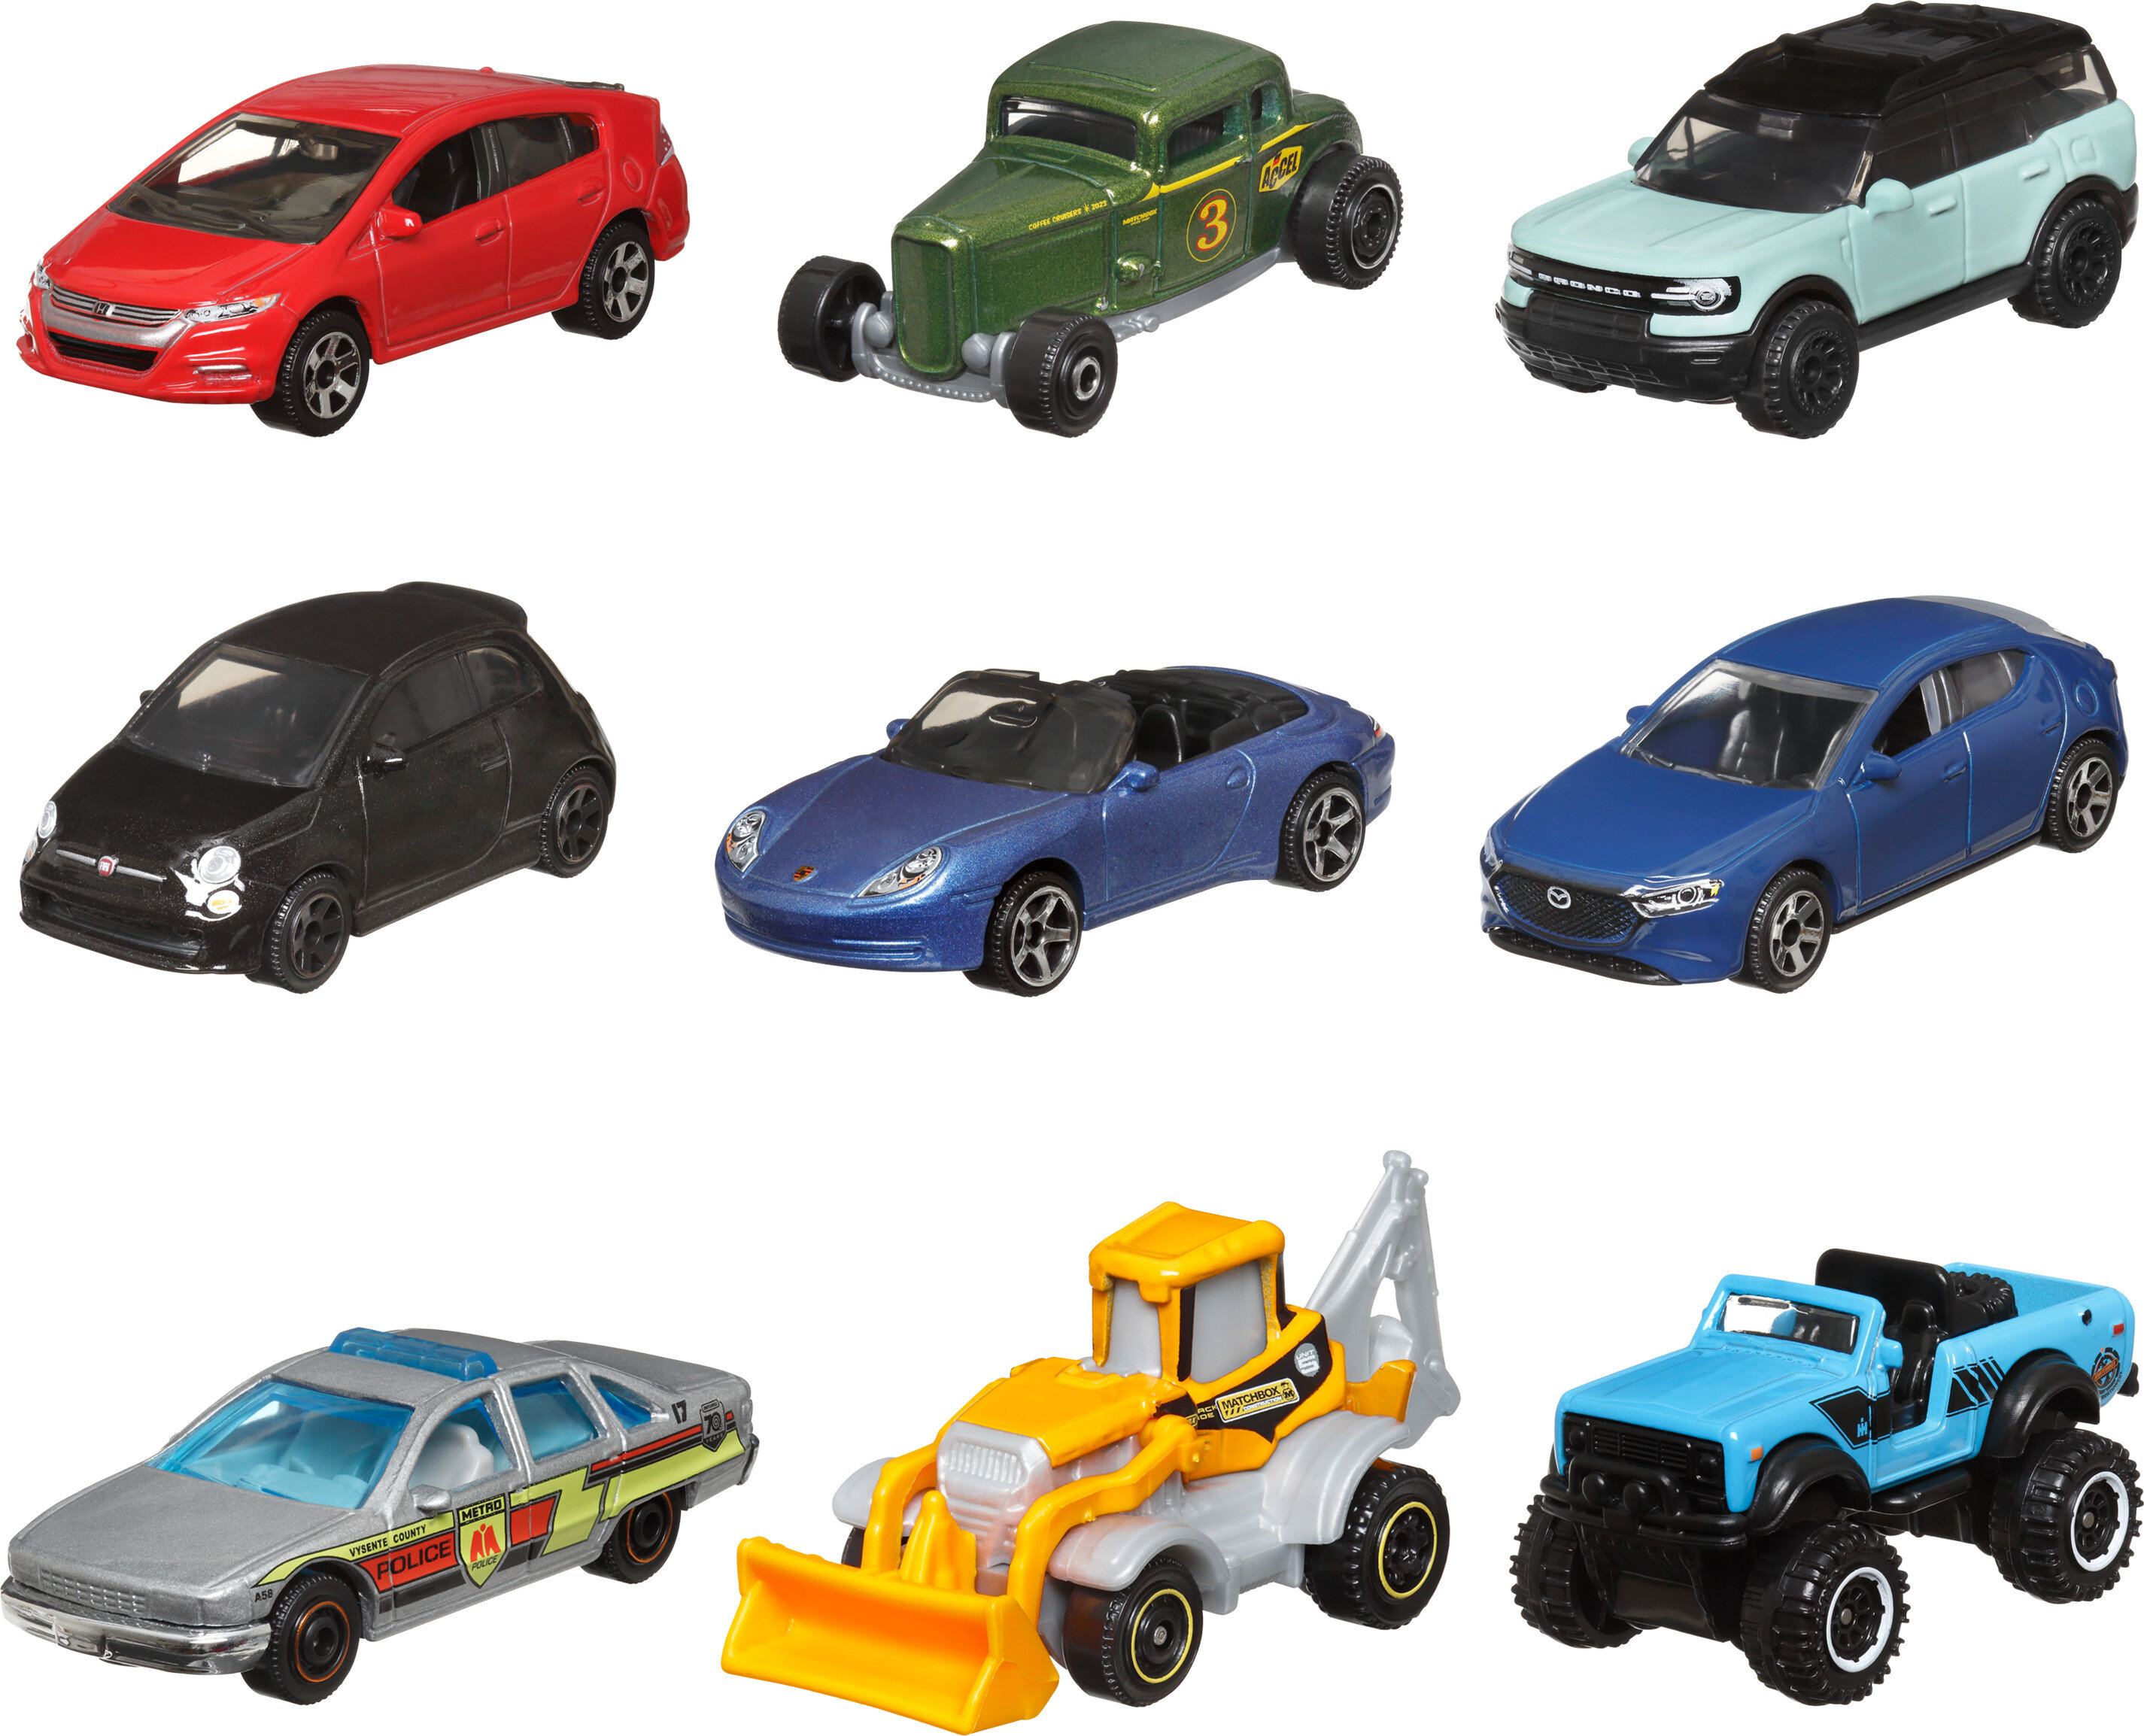 Matchbox Gift Set of 9 Themed Cars or Trucks in 1:64 Scale (Styles May Vary) - image 4 of 6